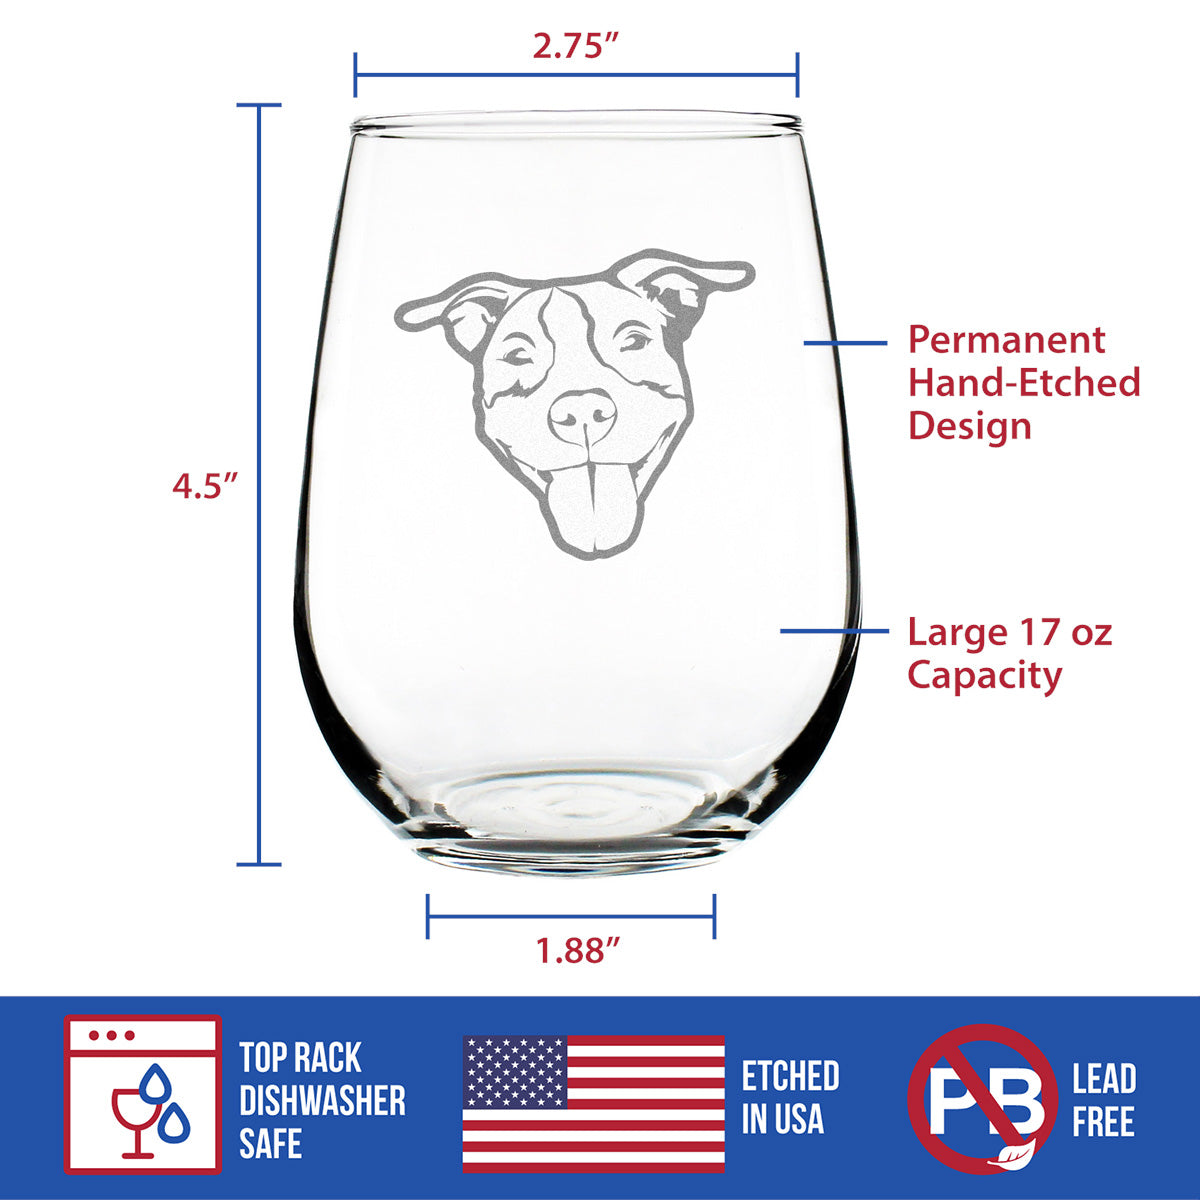 Happy Pitbull - Stemless Wine Glass - Cute Pitbull Themed Dog Gifts and Party Decor for Women and Men - Large Glasses